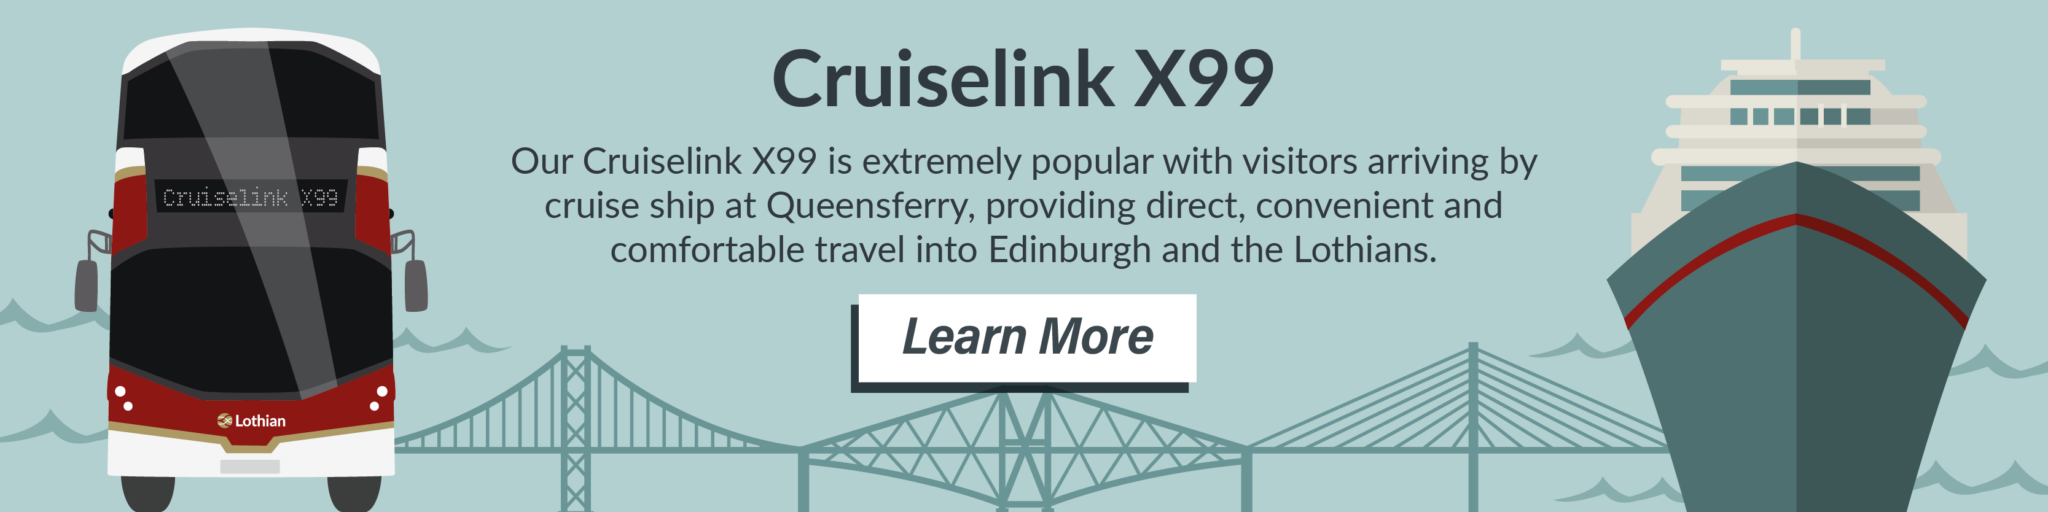 Our Cruiselink X99 is extremely popular with visitors arriving by cruise ship at Queensferry, providing direct, convenient and comfortable travel into Edinburgh and the Lothians. Learn More.